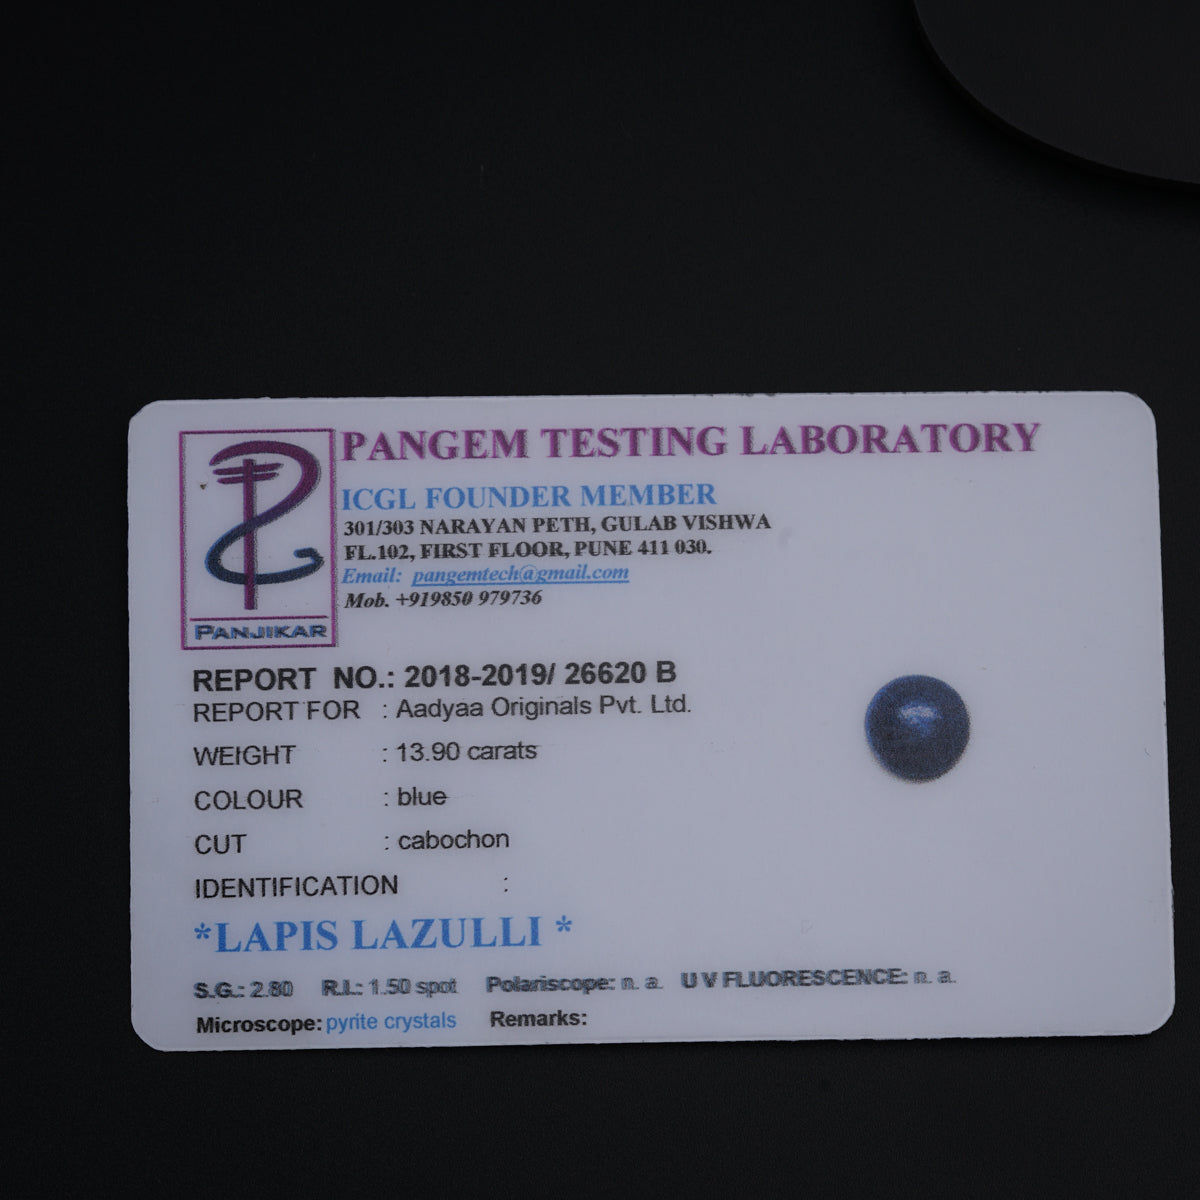 a tag on a table that says pancem testing laboratory